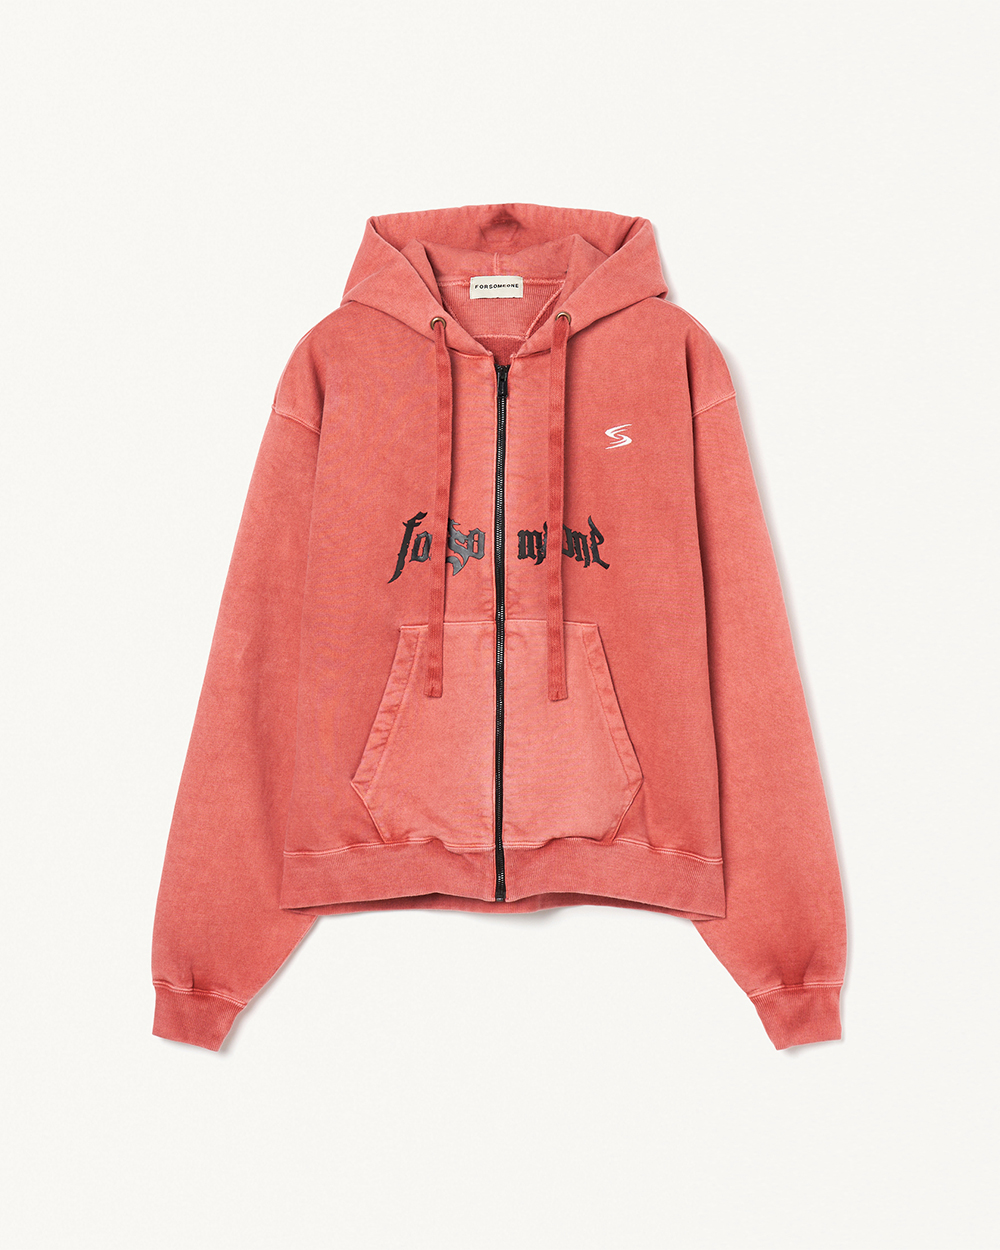 NY EAGLE ZIP HOODIE 詳細画像 Red 3